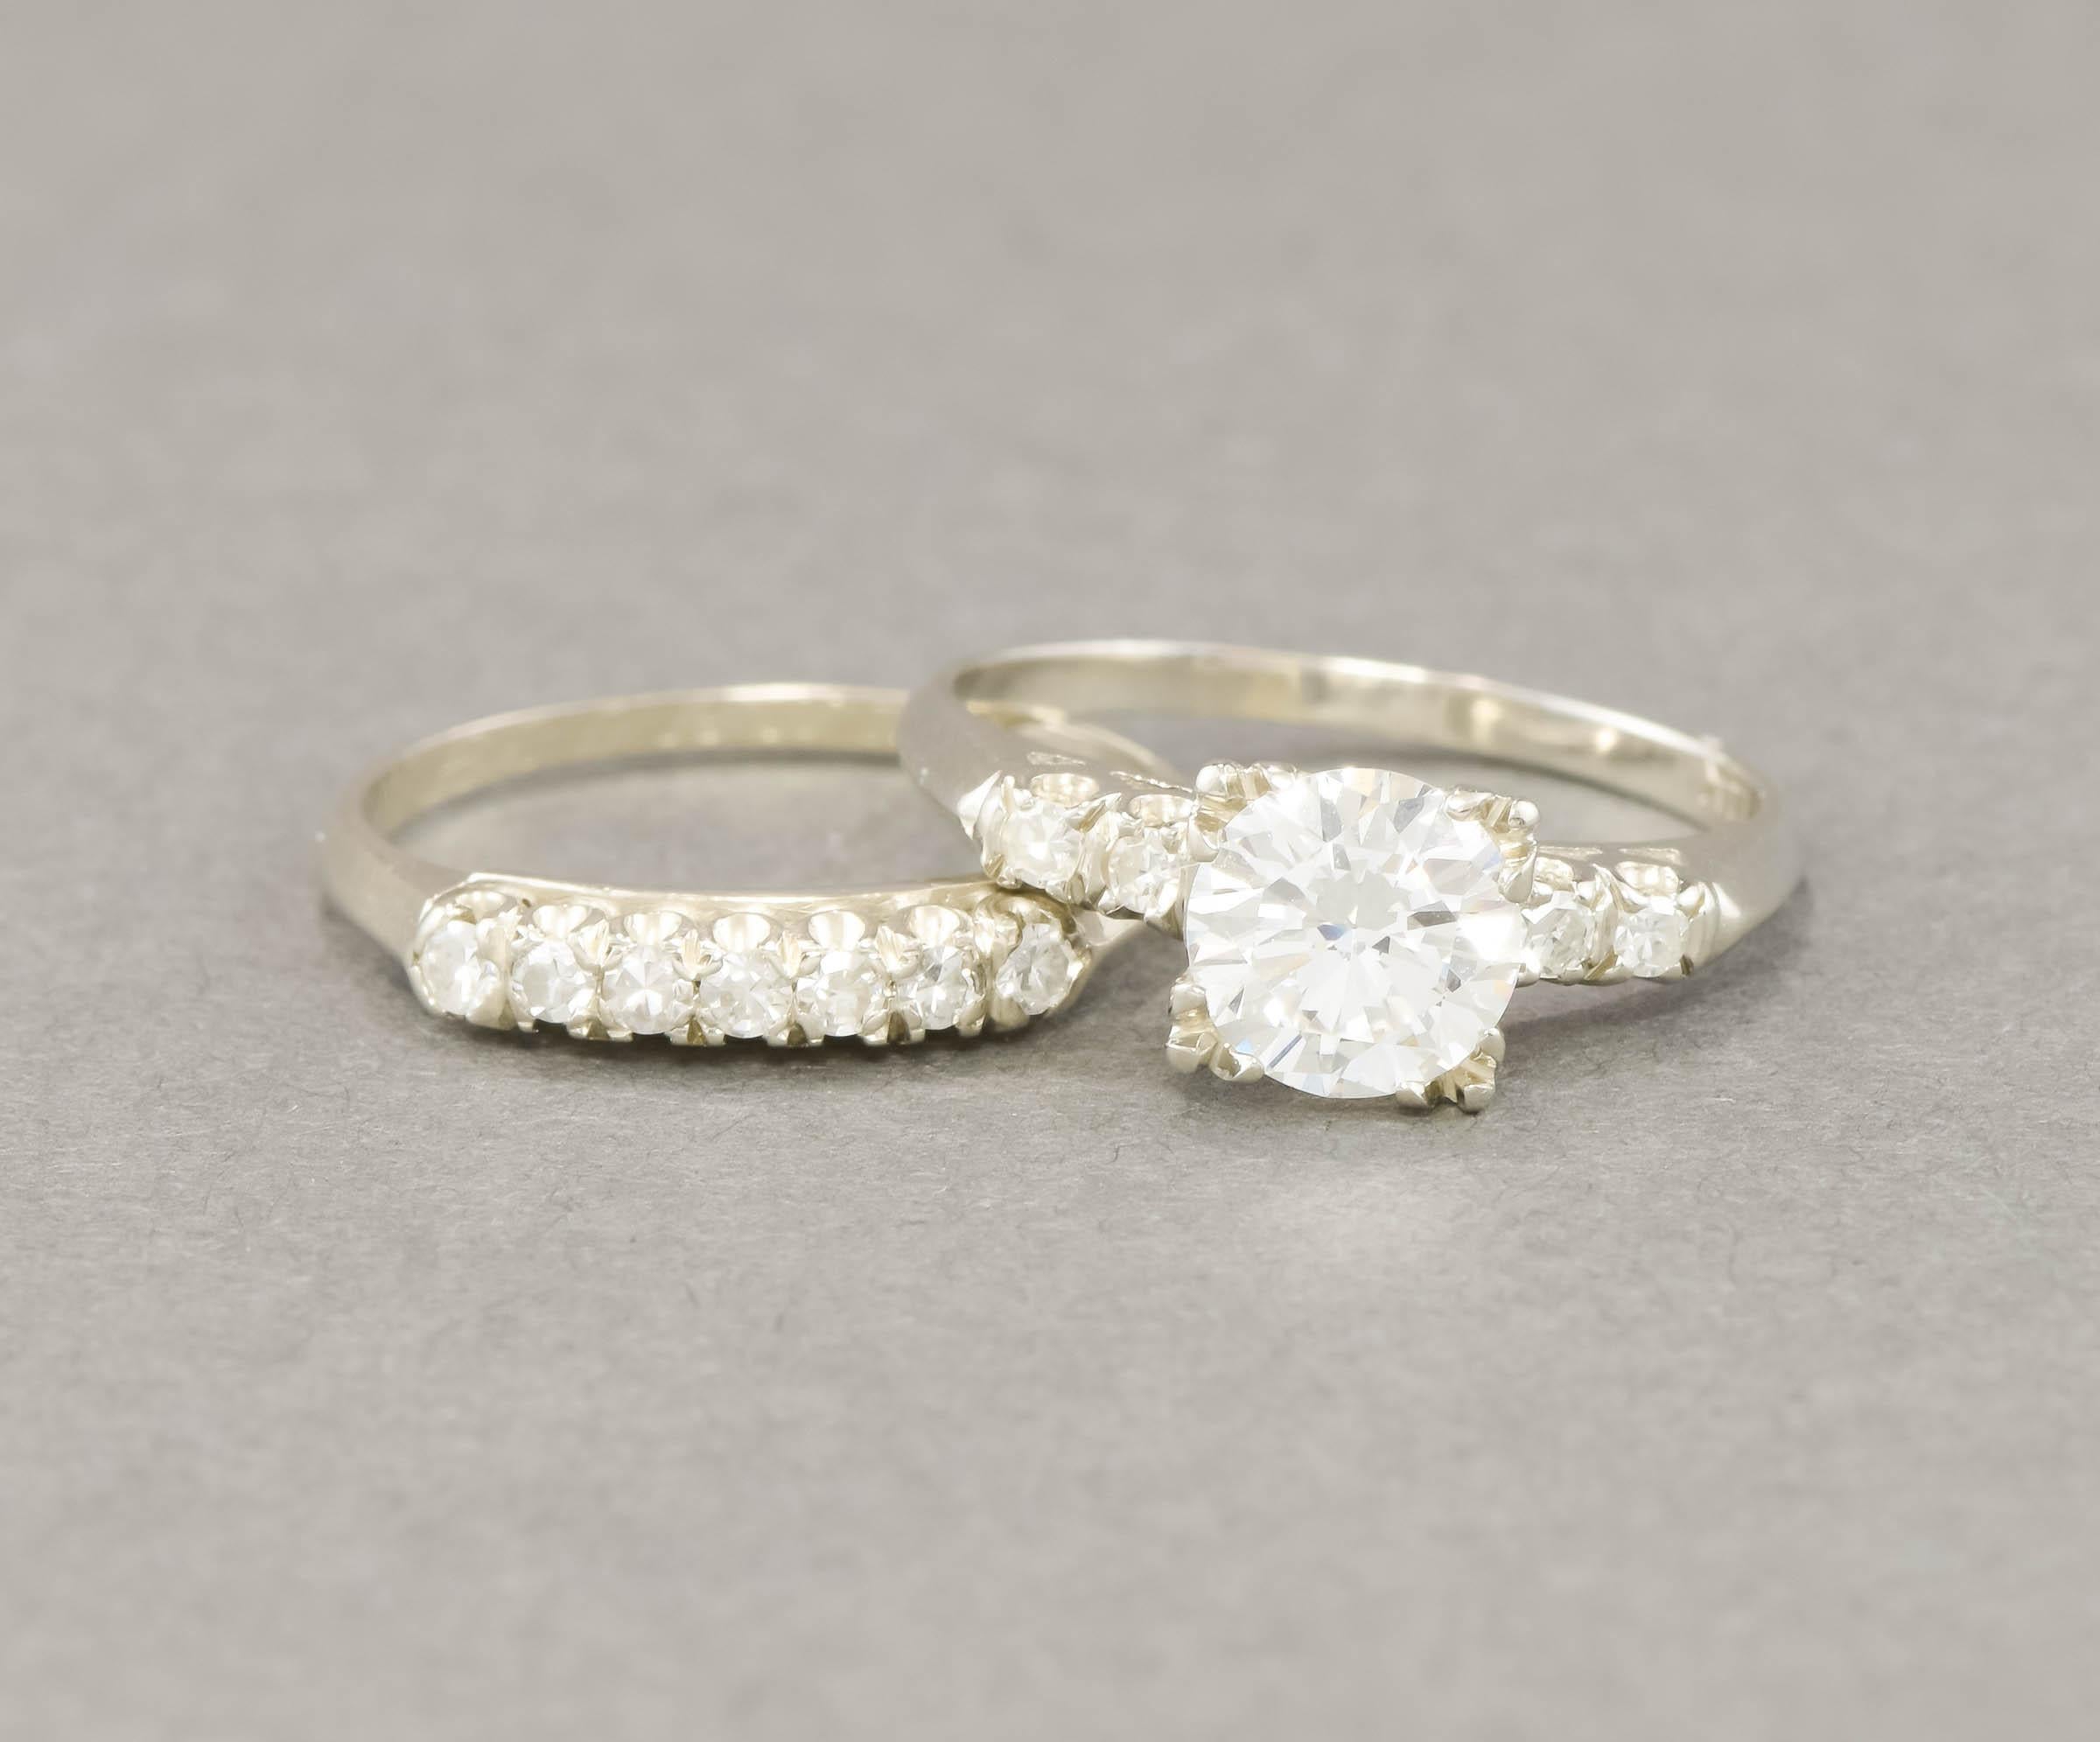 Vintage European Cut Diamond Wedding Set with Appraisal, 1.30 ctw In Good Condition For Sale In Danvers, MA